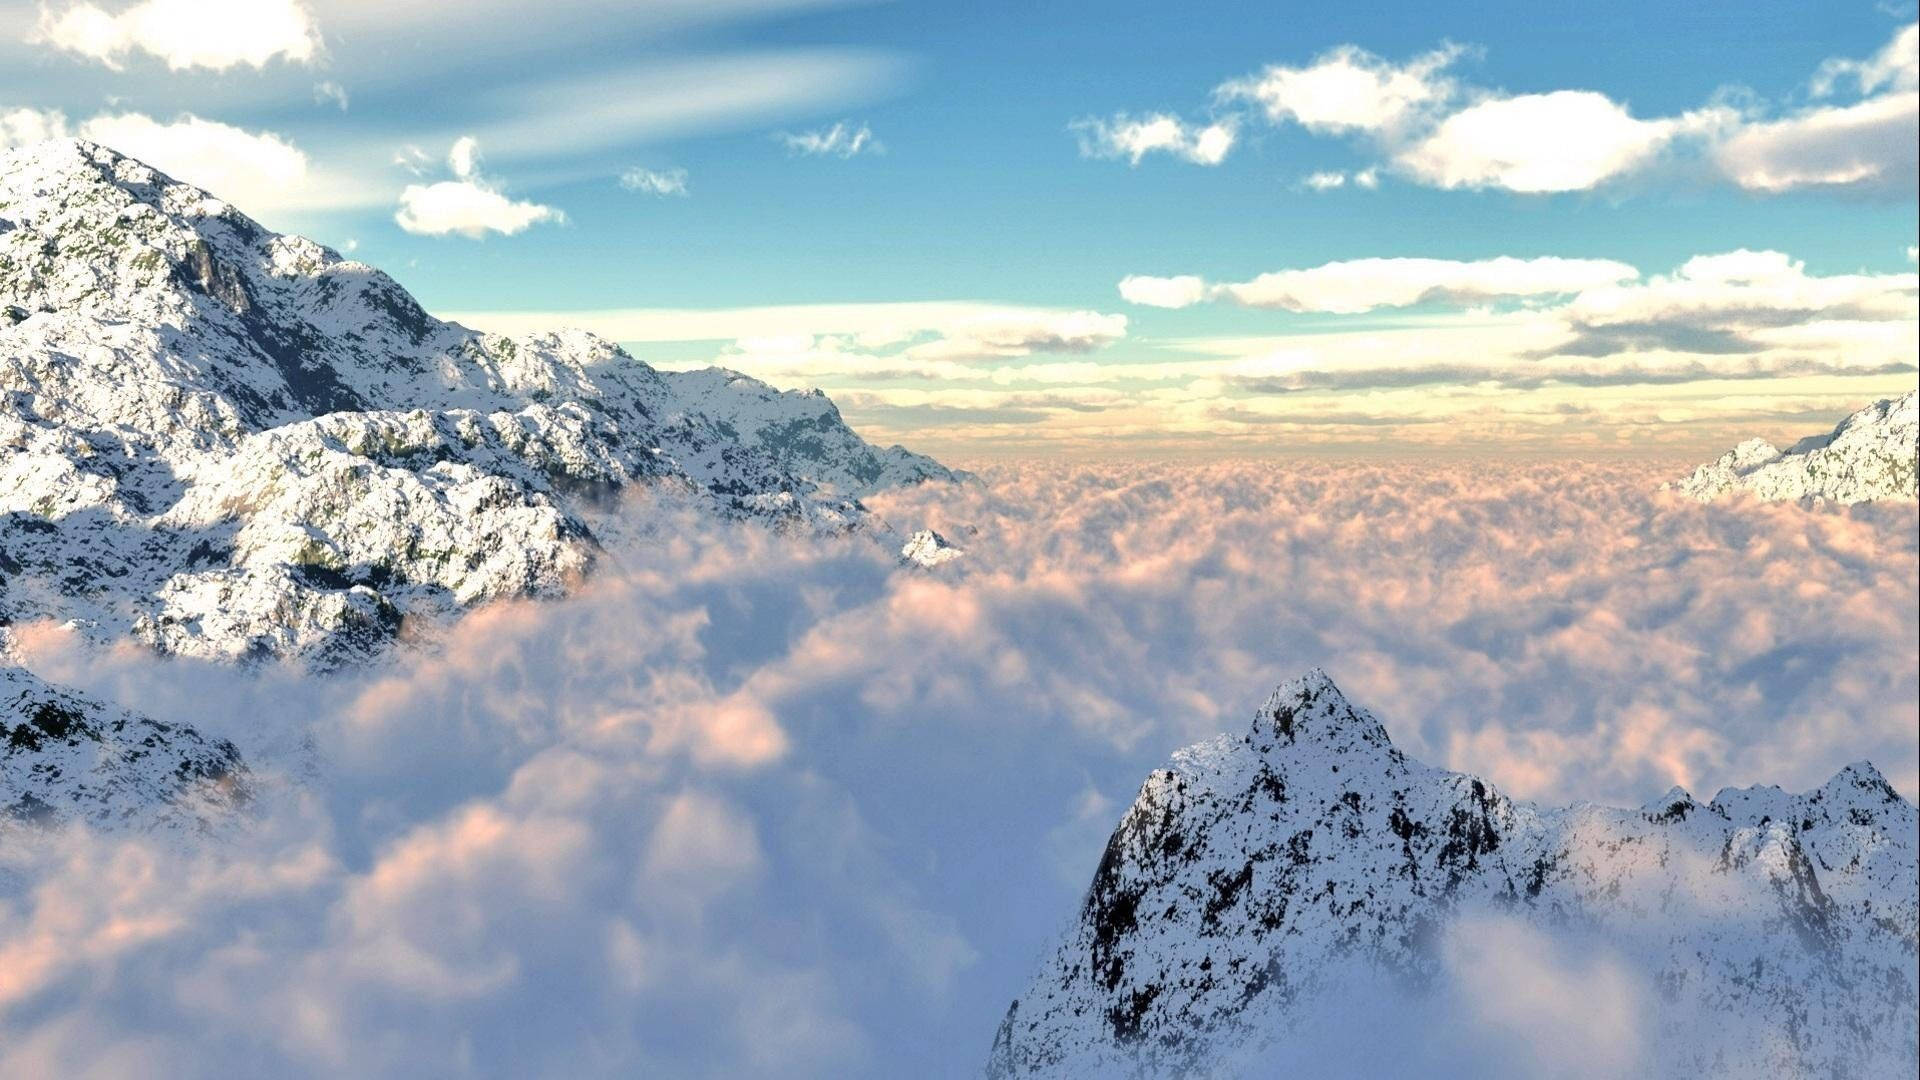 Take a break and admire the beautiful mountain view Wallpaper